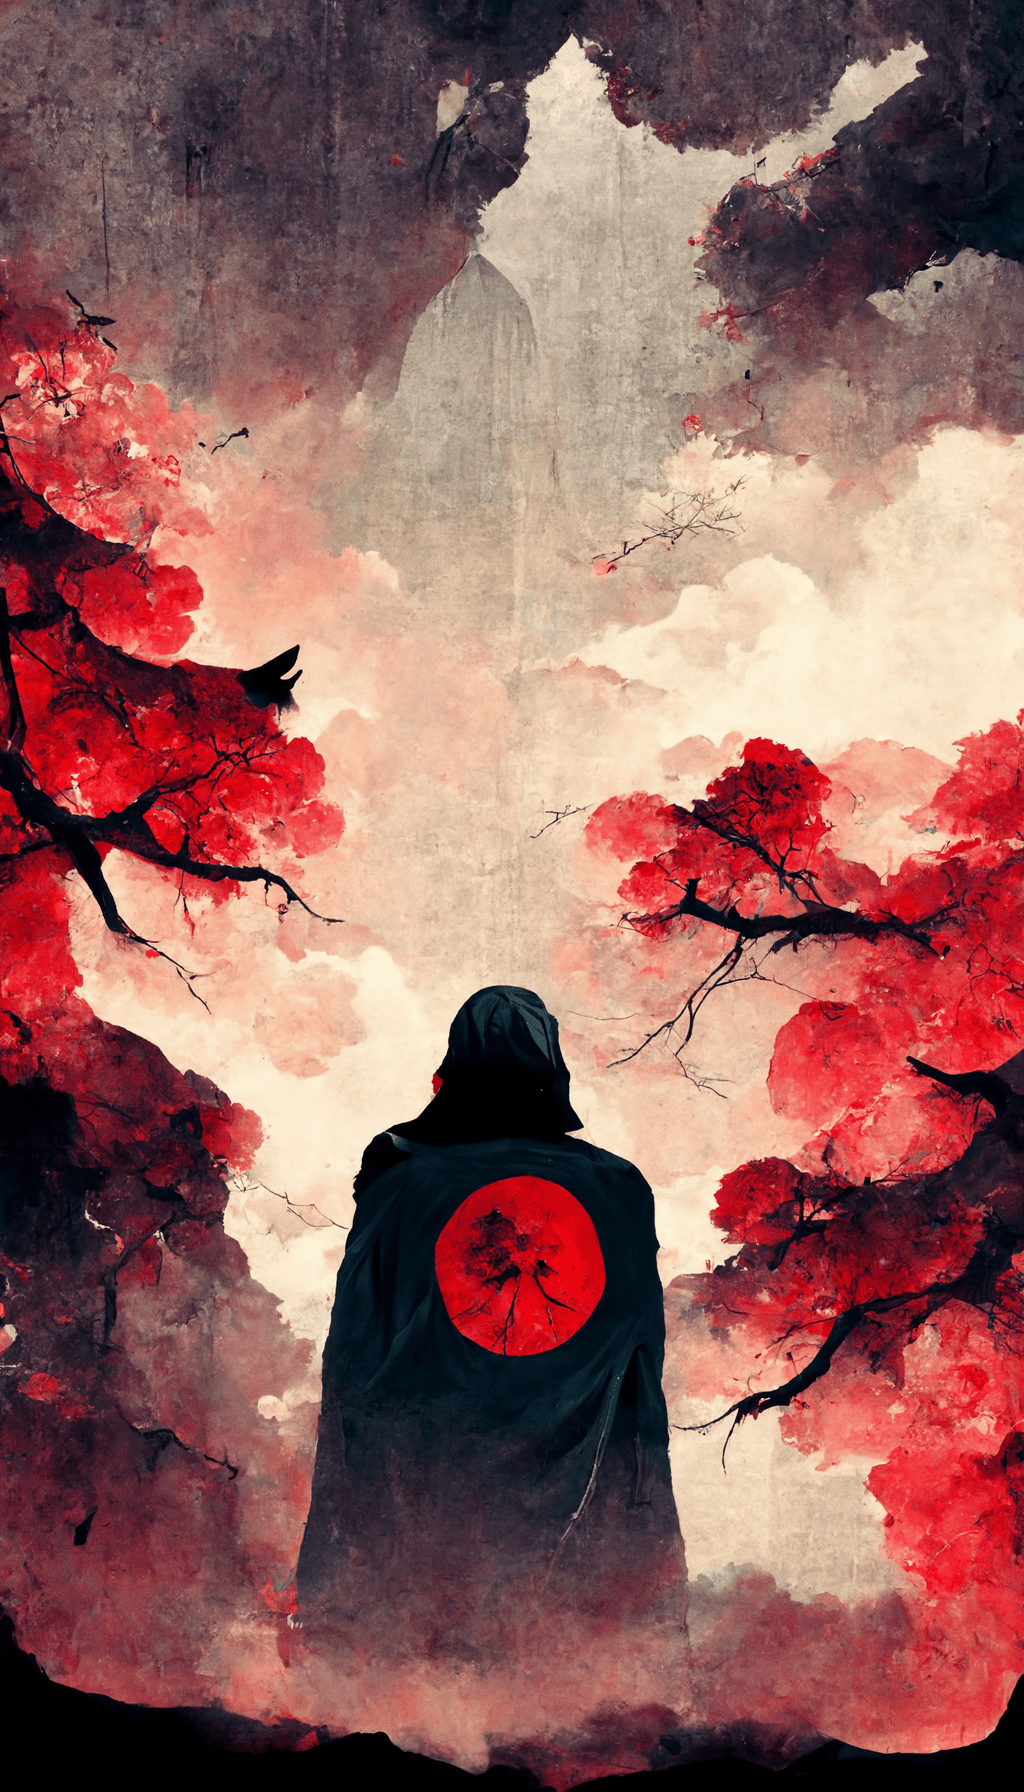 A man in a black hoody with a red sun on the back stands in front of a red blooming tree - Itachi Uchiha, Sasuke Uchiha